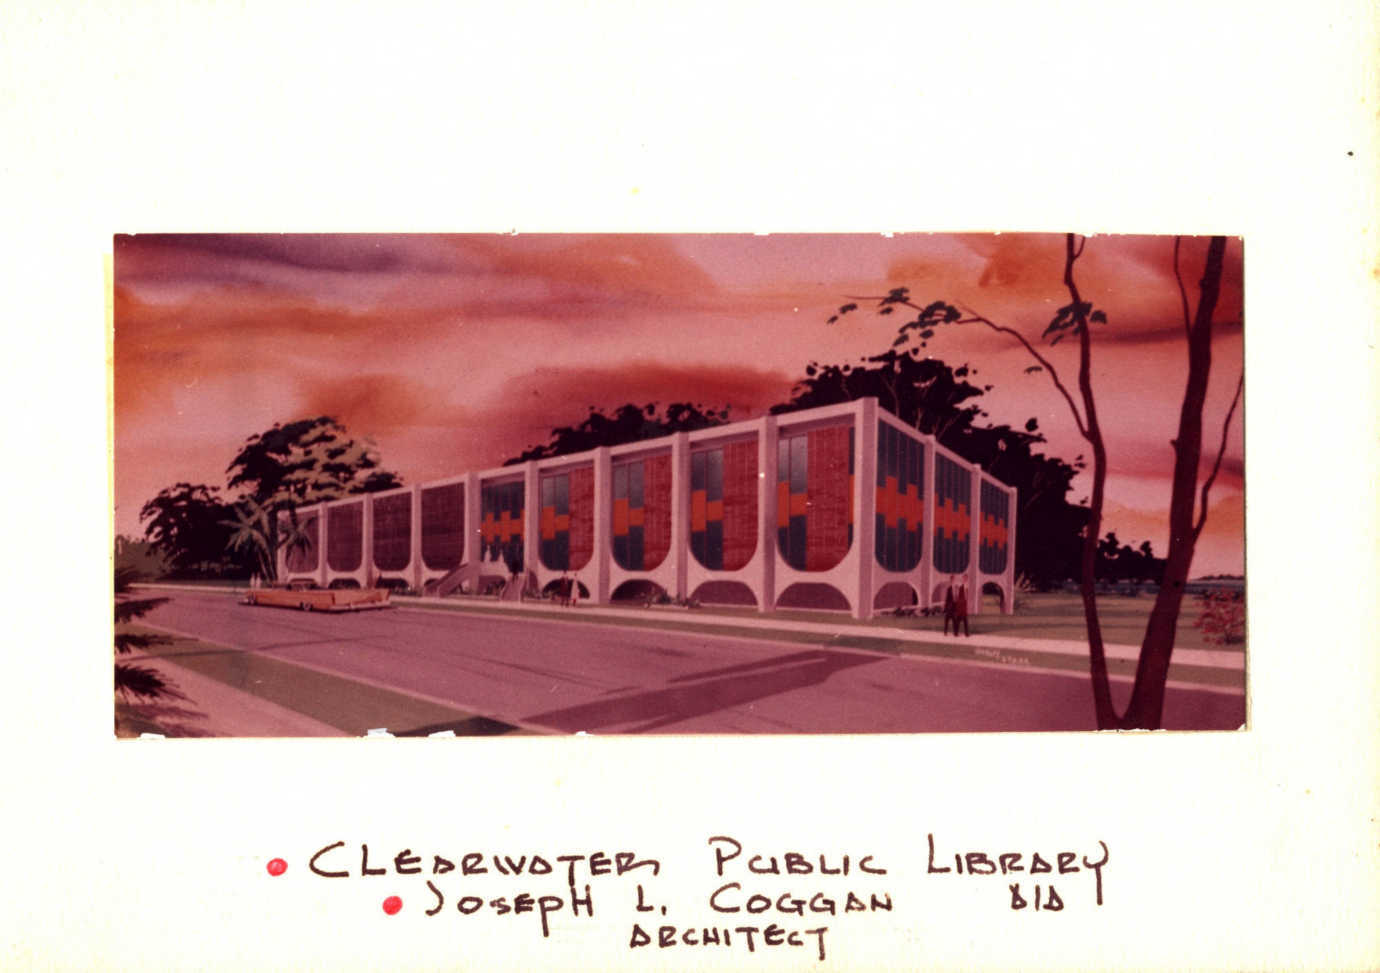 An architectural rendering of Clearwater Public Library, c. 1973, which was collected during a digitization day. Image courtesy of Clearwater Public Library.